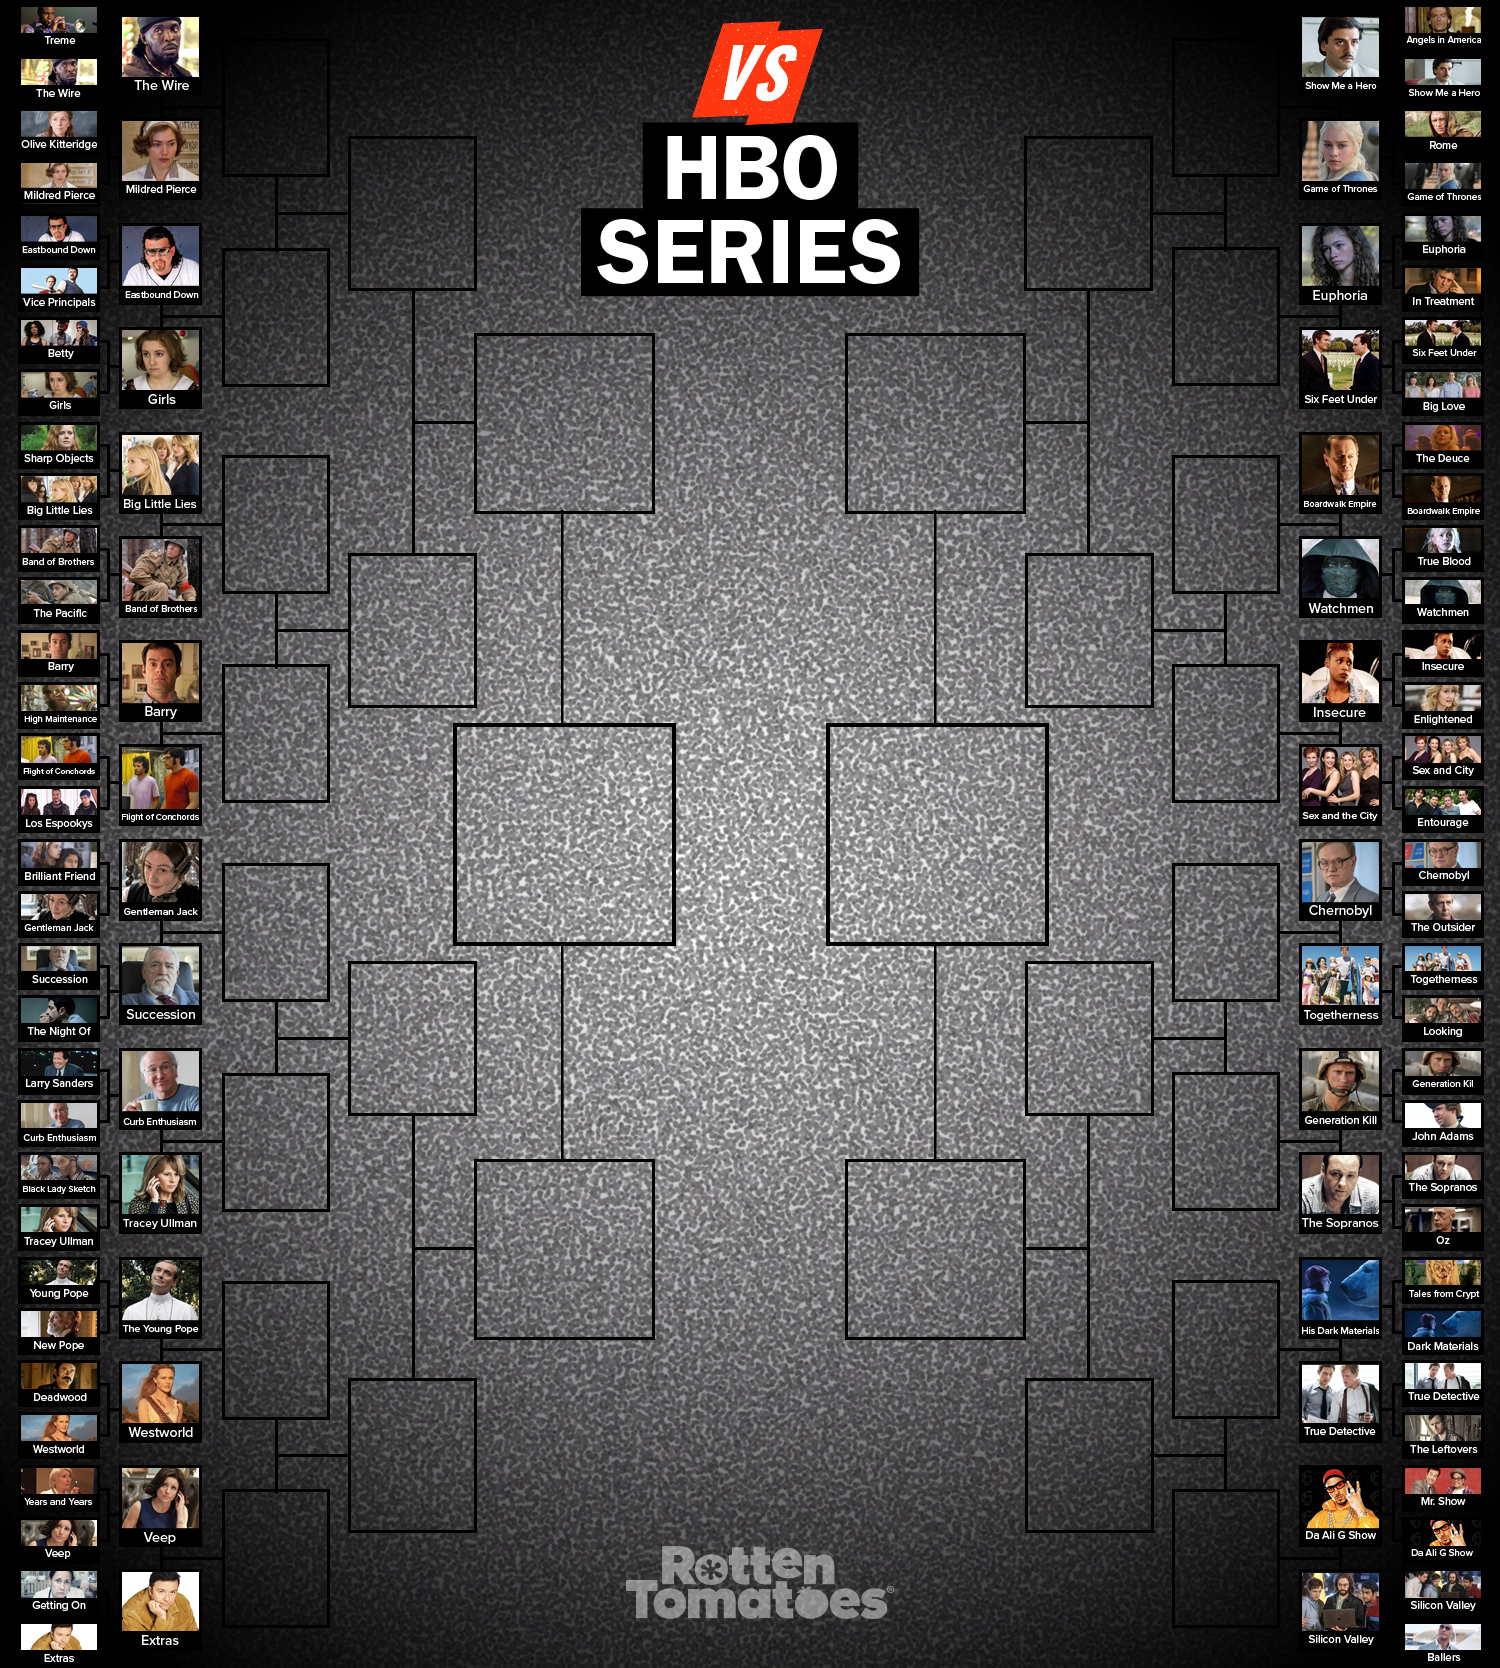 All HBO Series Ranked by Tomatometer